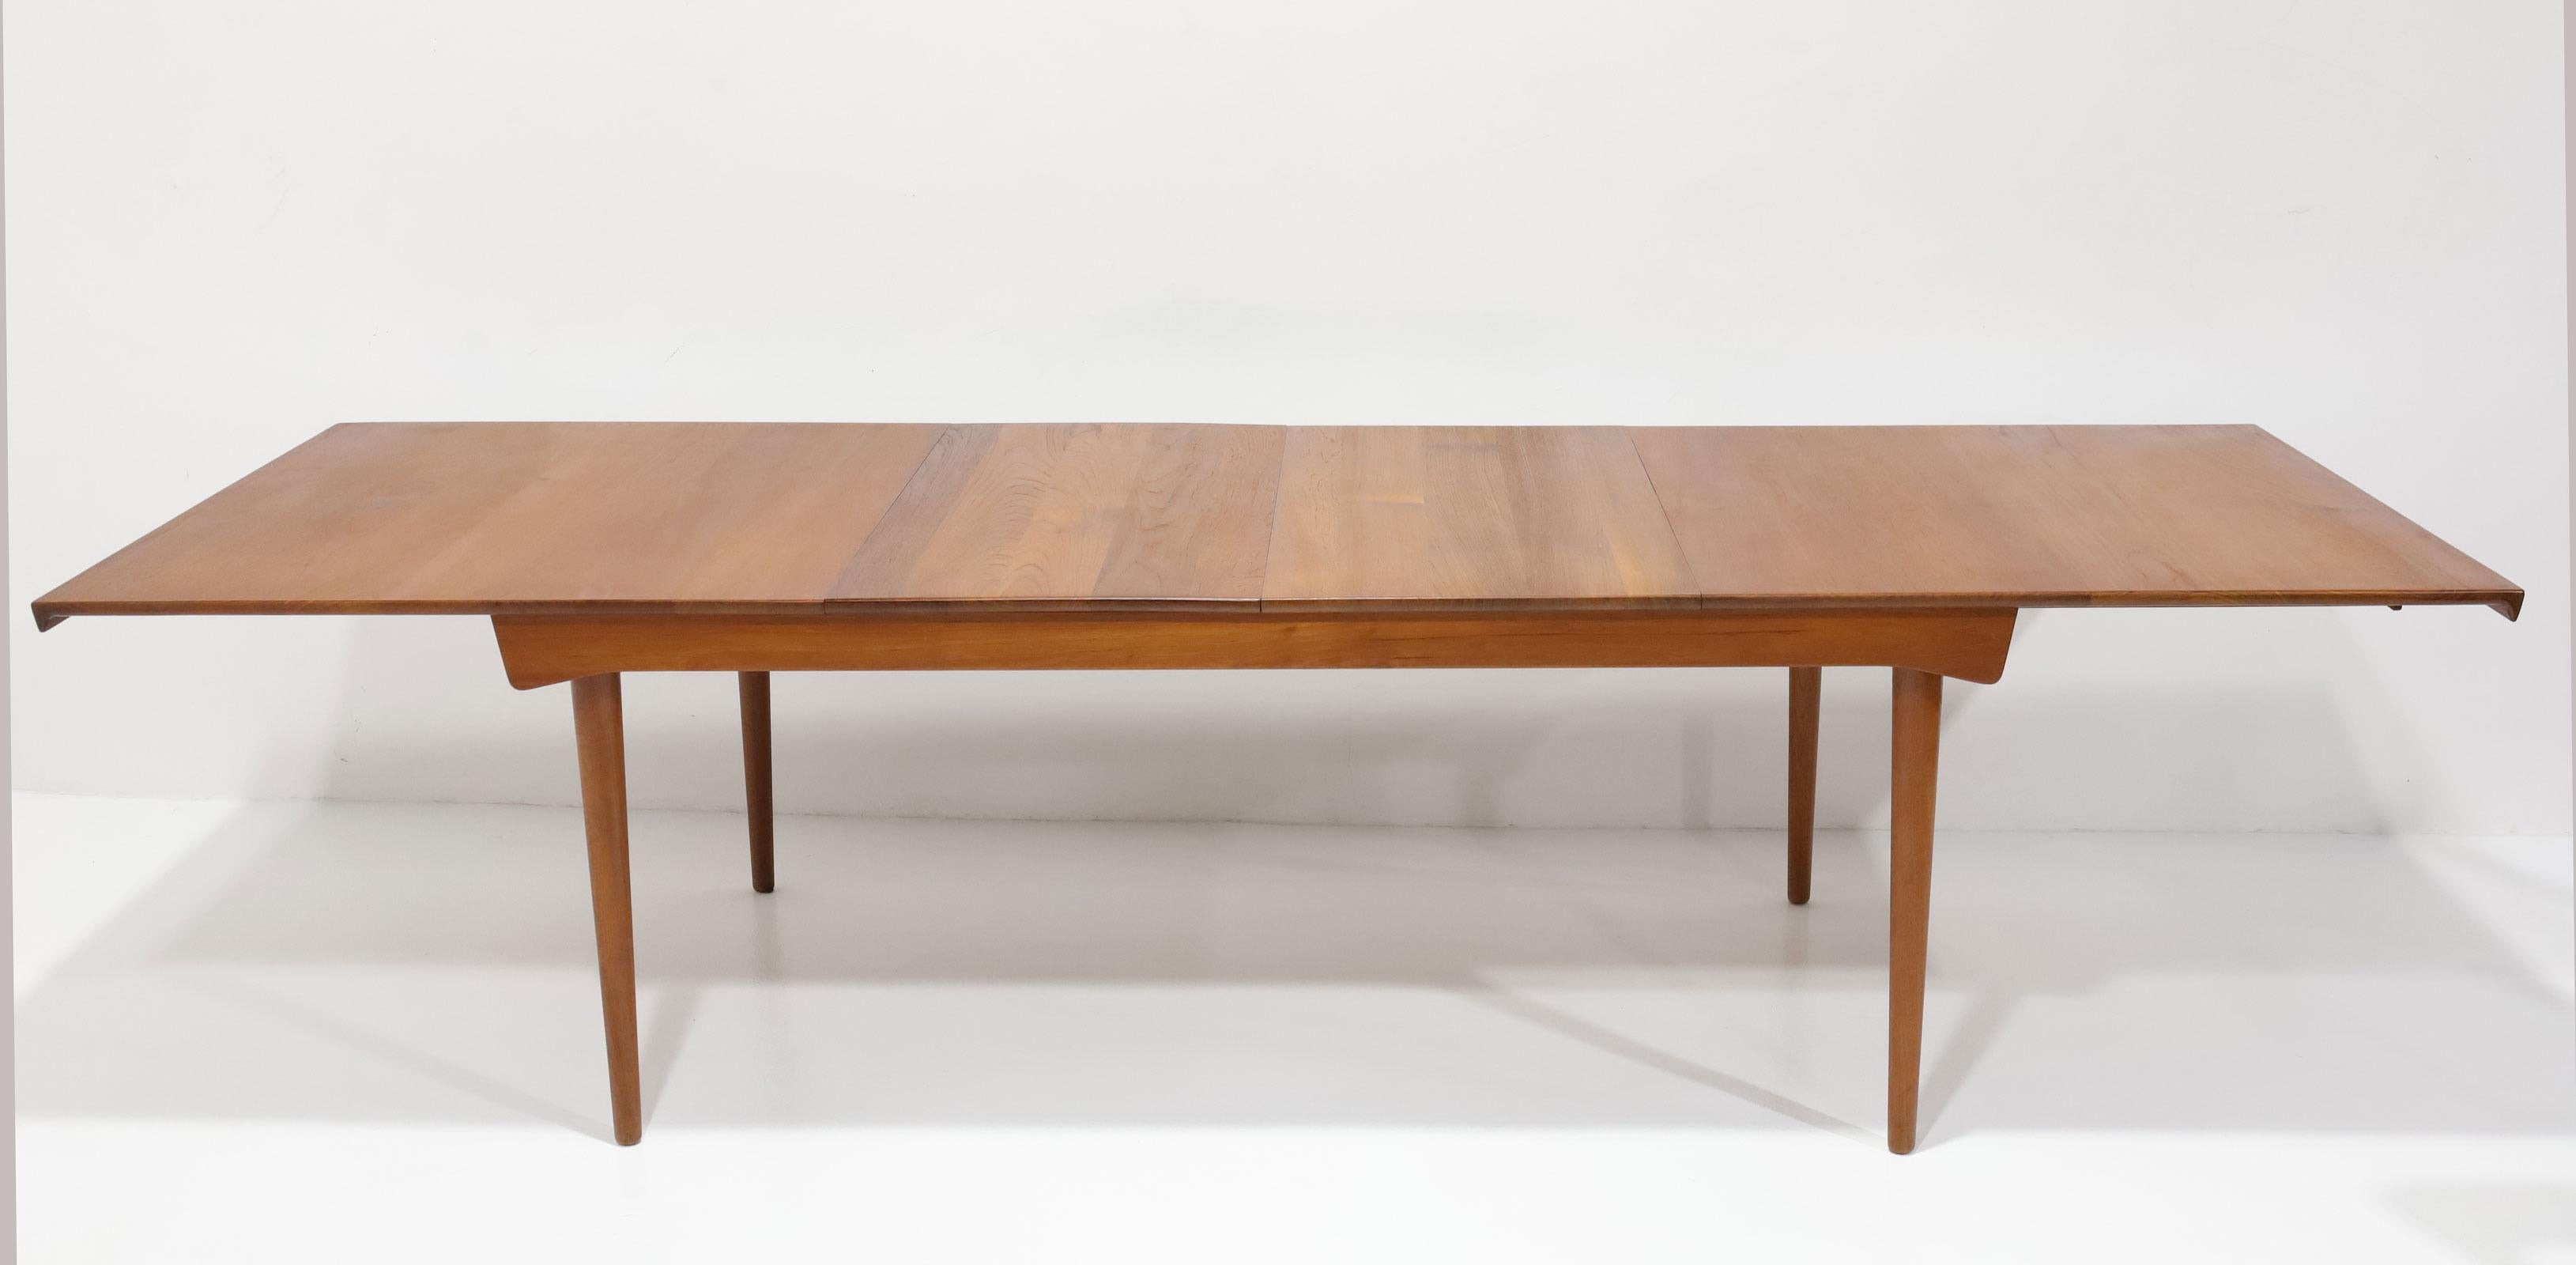 Beautiful Finn Juhl teak dining table model FD 540. This table was manufactured by France & Son in Denmark and distributed by Povl Dinesen. 1950s. This table has two extension leaves underneath the table. Each leaf is 19.75